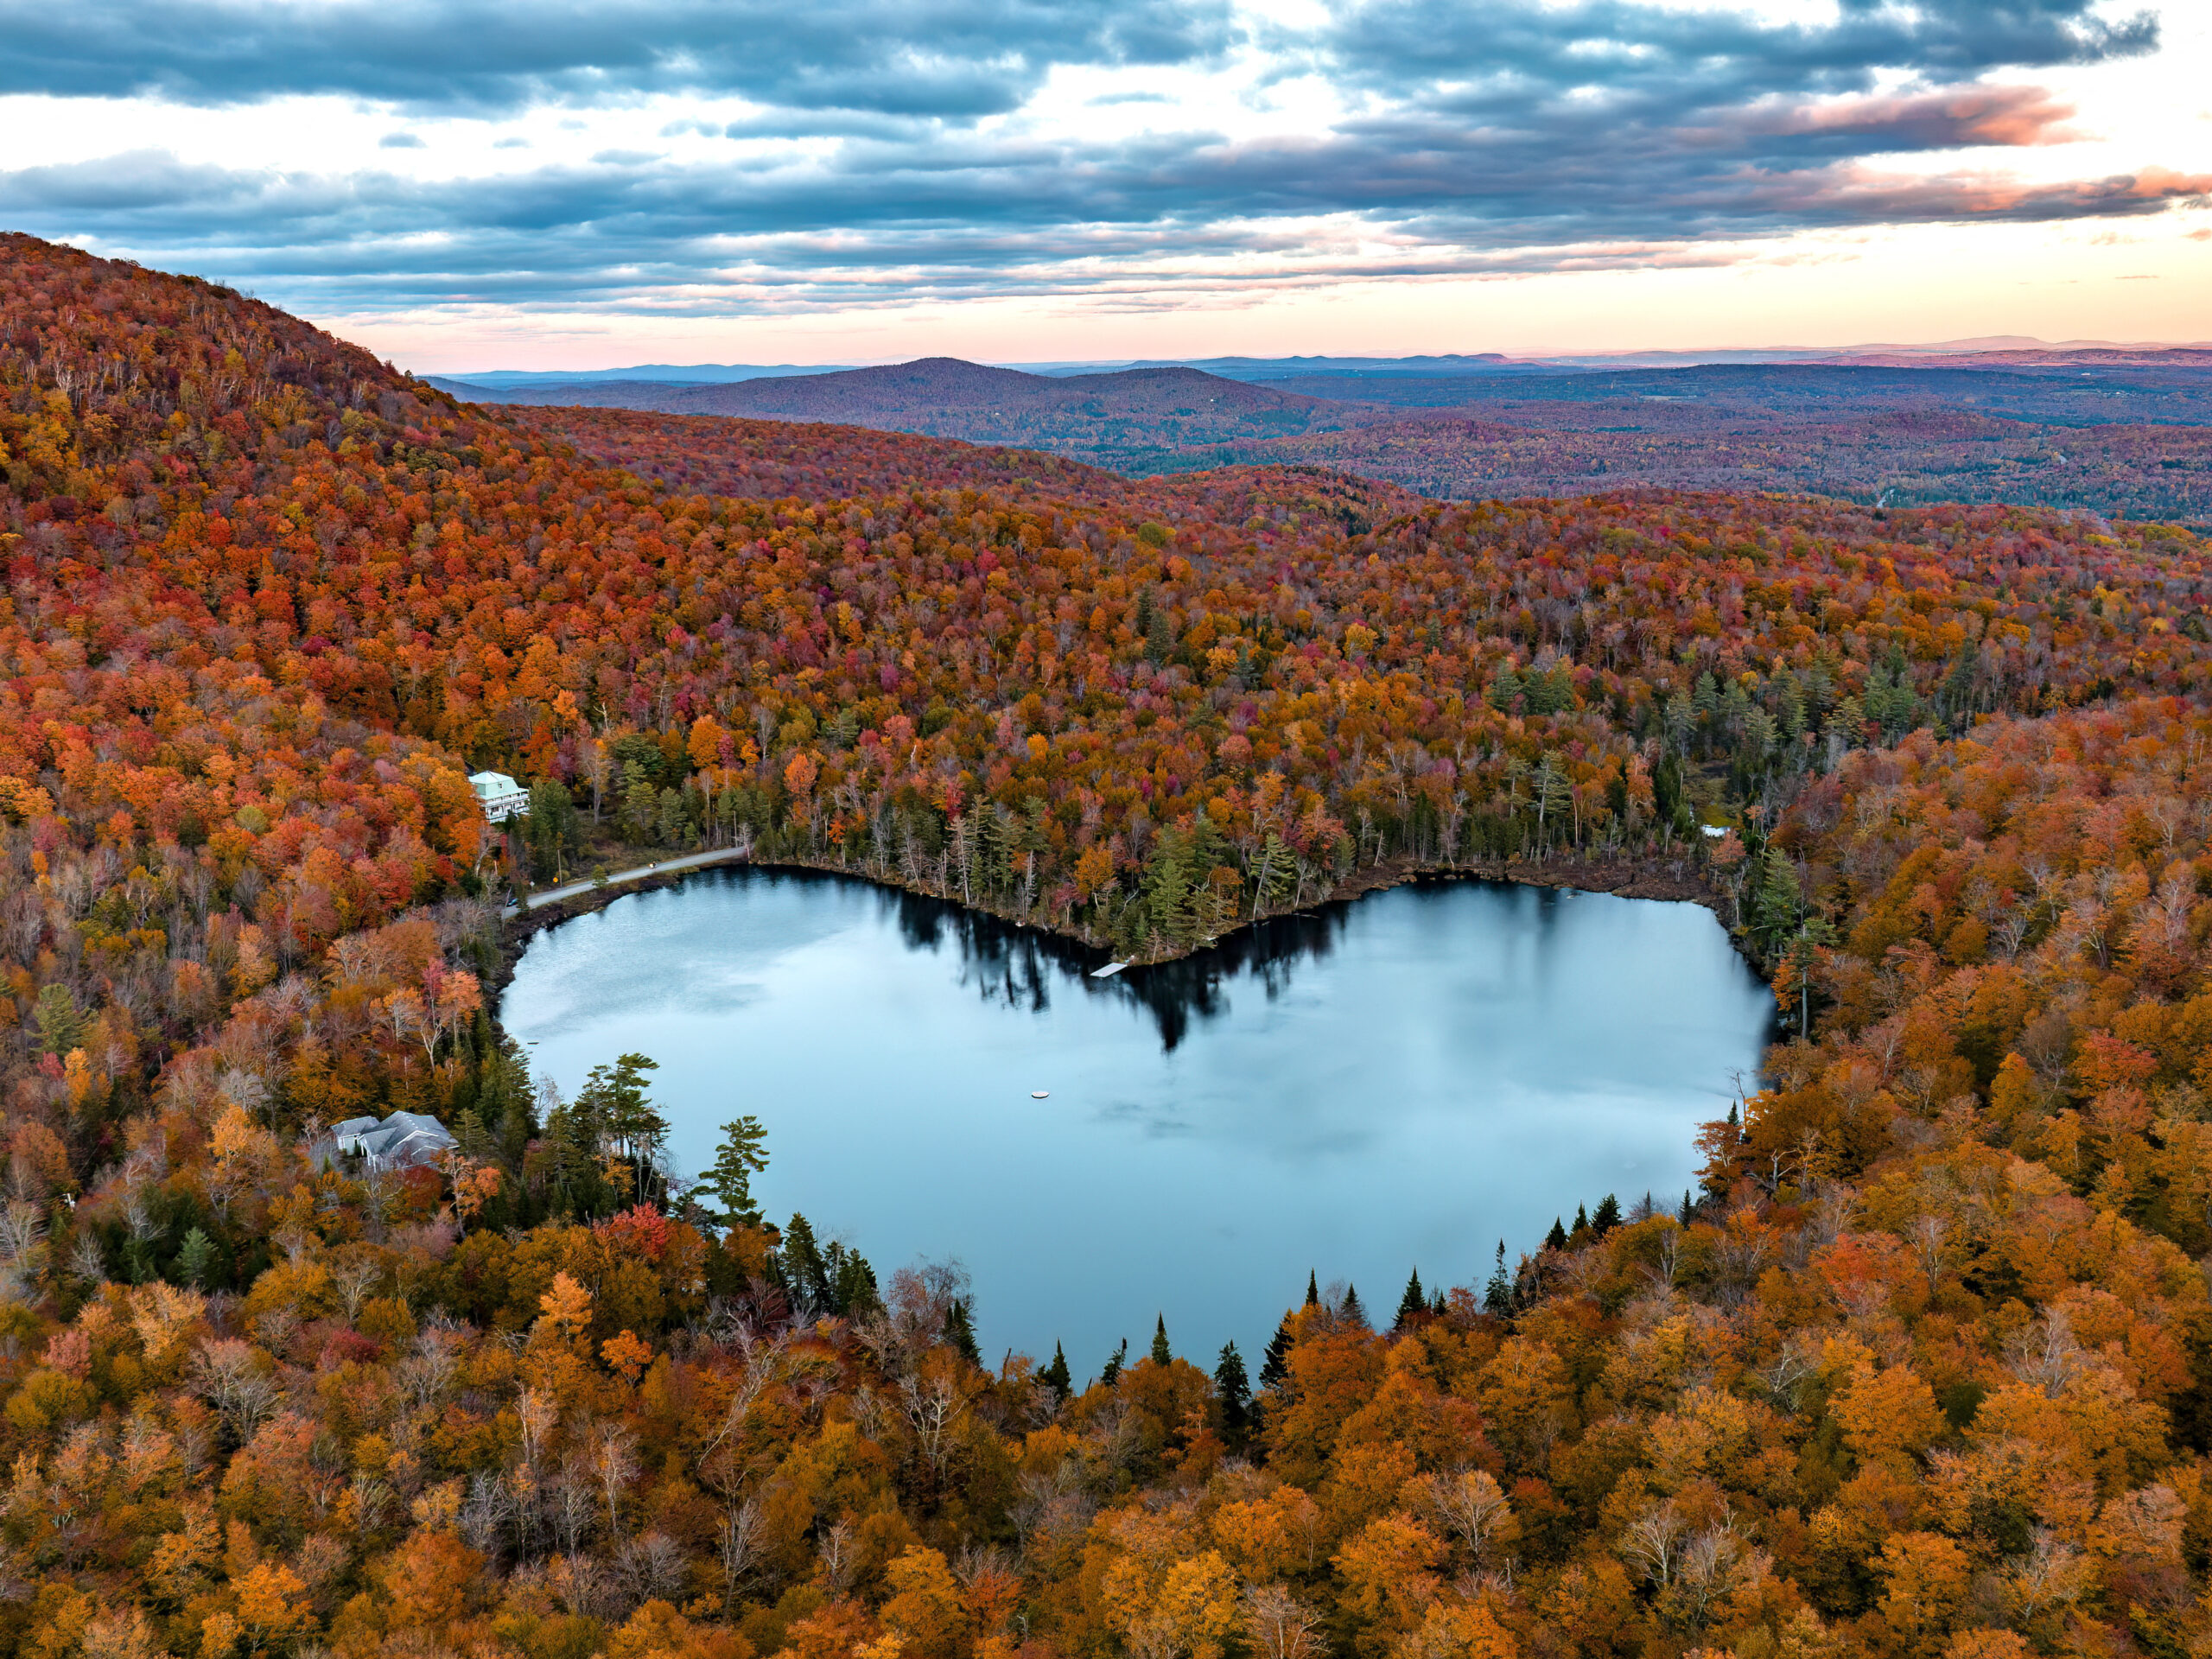 The trees in this photo are amazing (and not just because they happen to be growing in a very Instagrammable heart shape around Baker Lake in Quebec, Canada.) Read on for a tree appreciation reading list for Arbor Day.